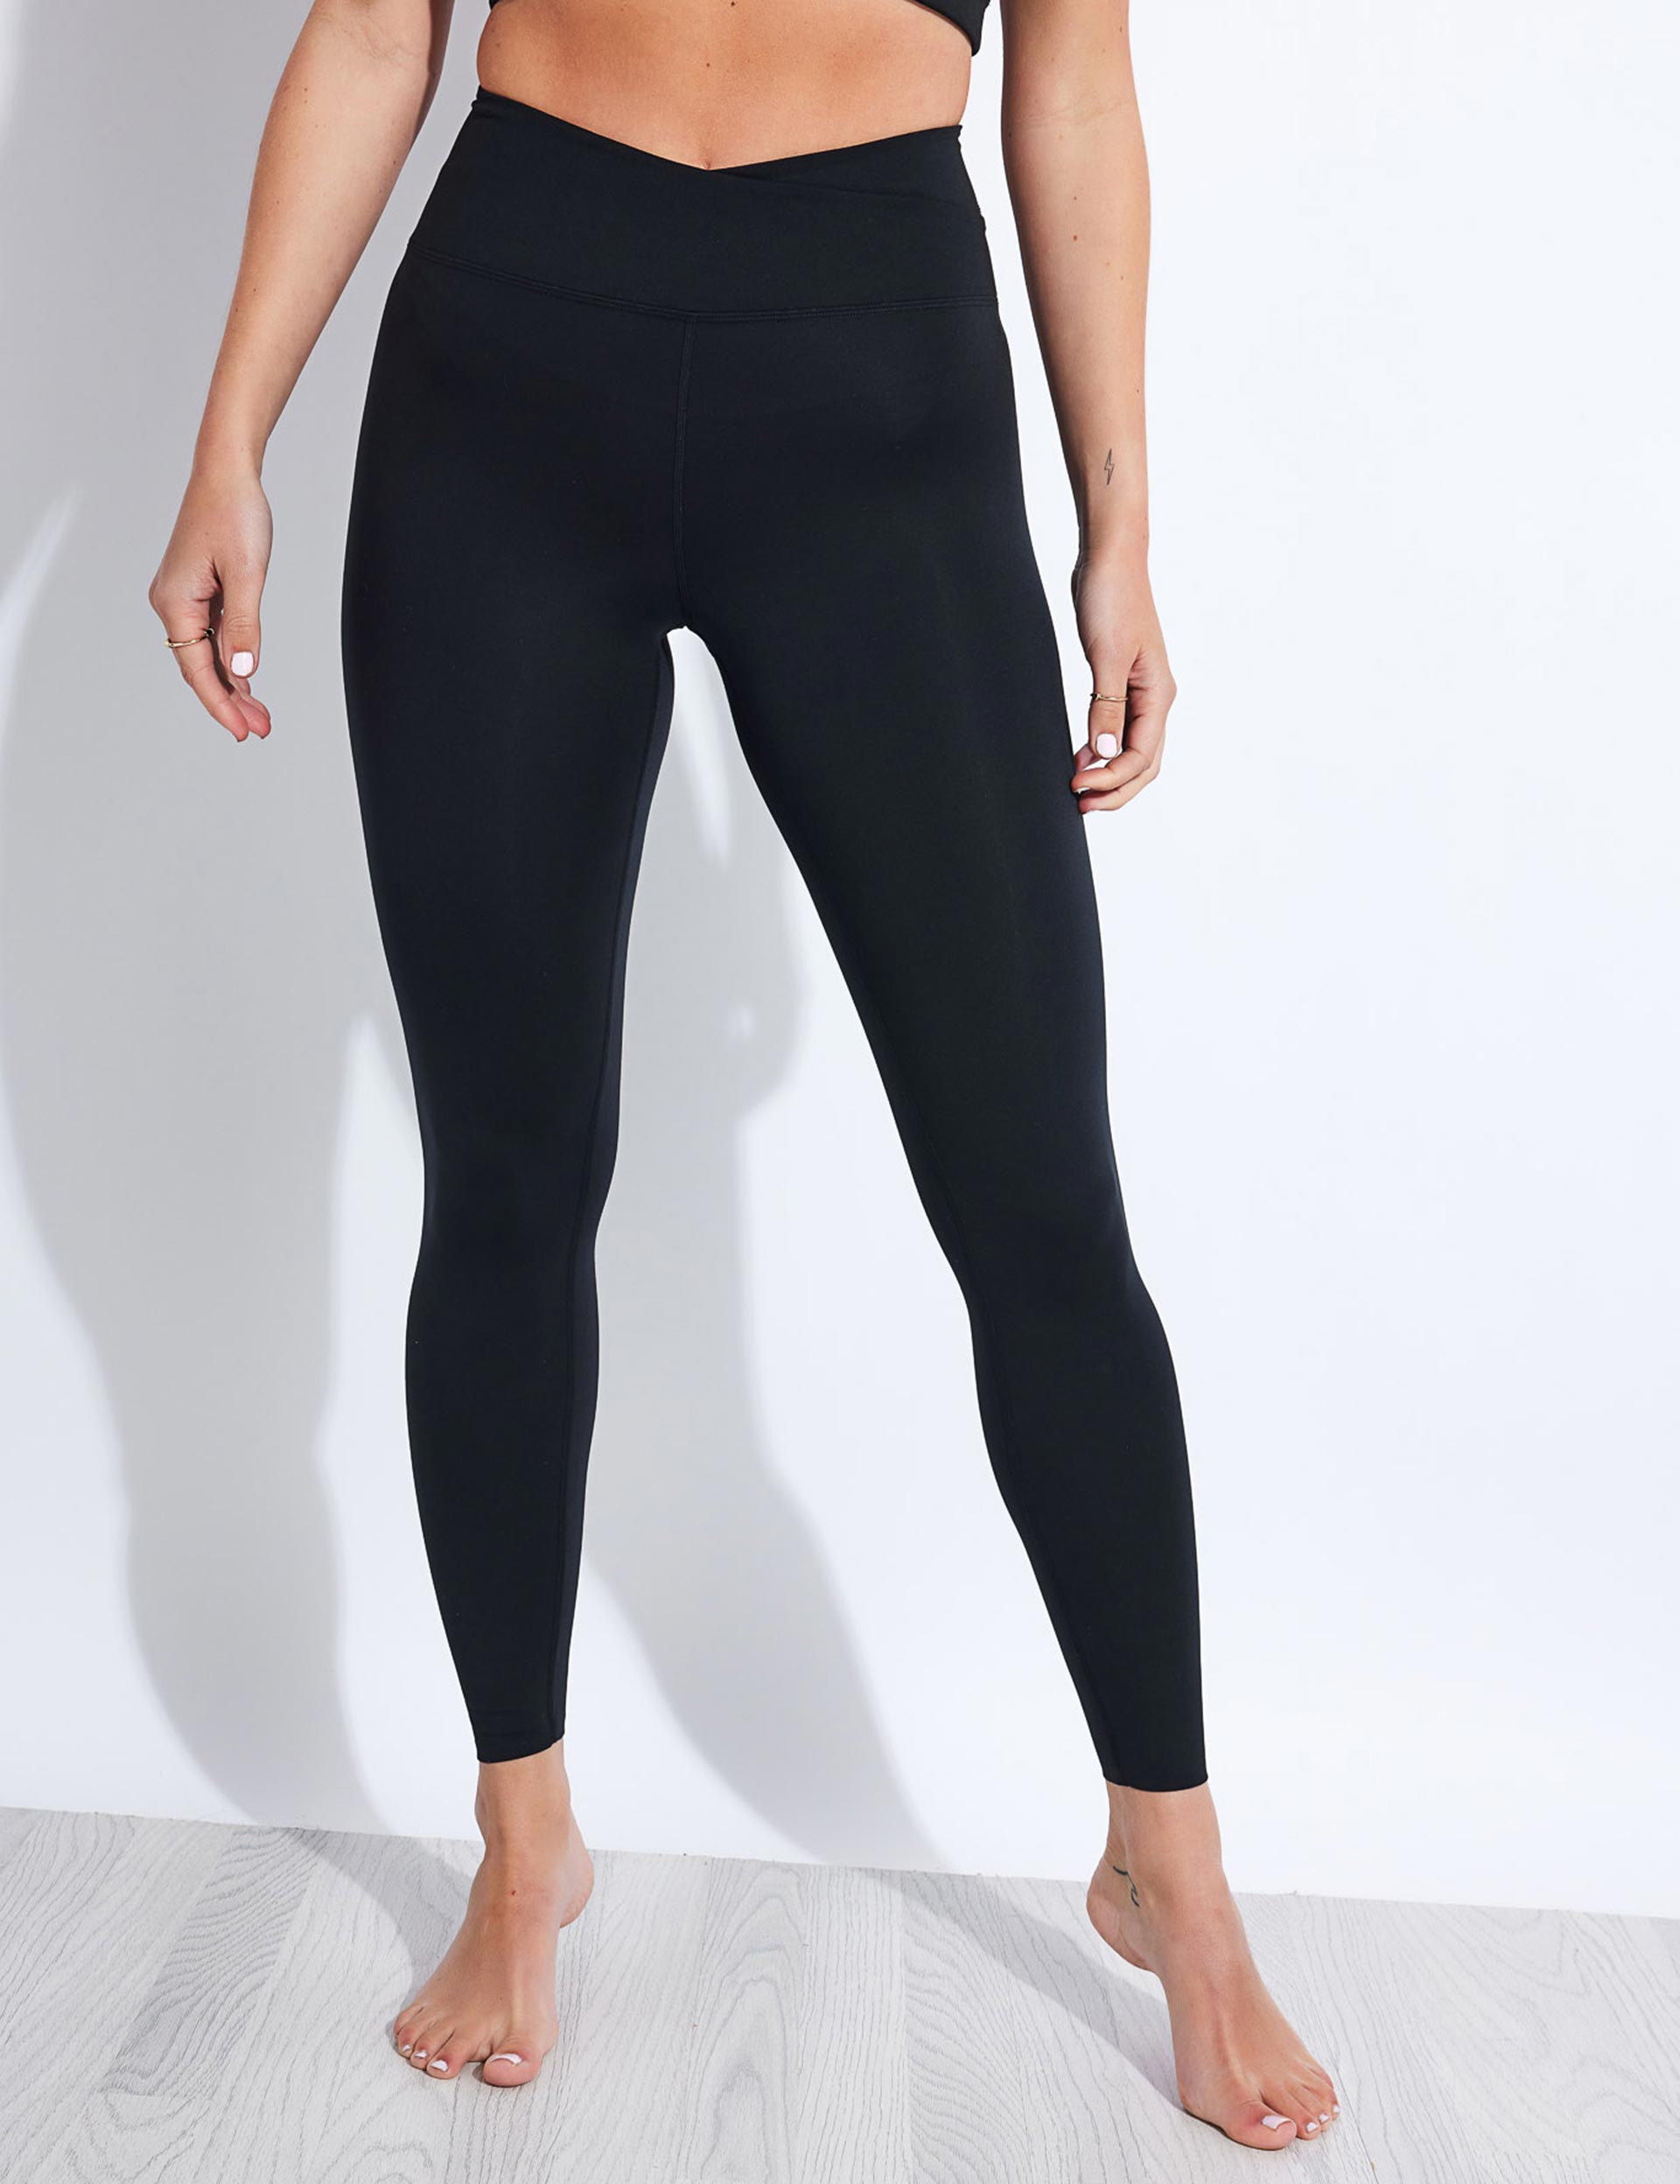 Difference Between Original SPANX ASSETS By SPANX Schimiggy, 40% OFF